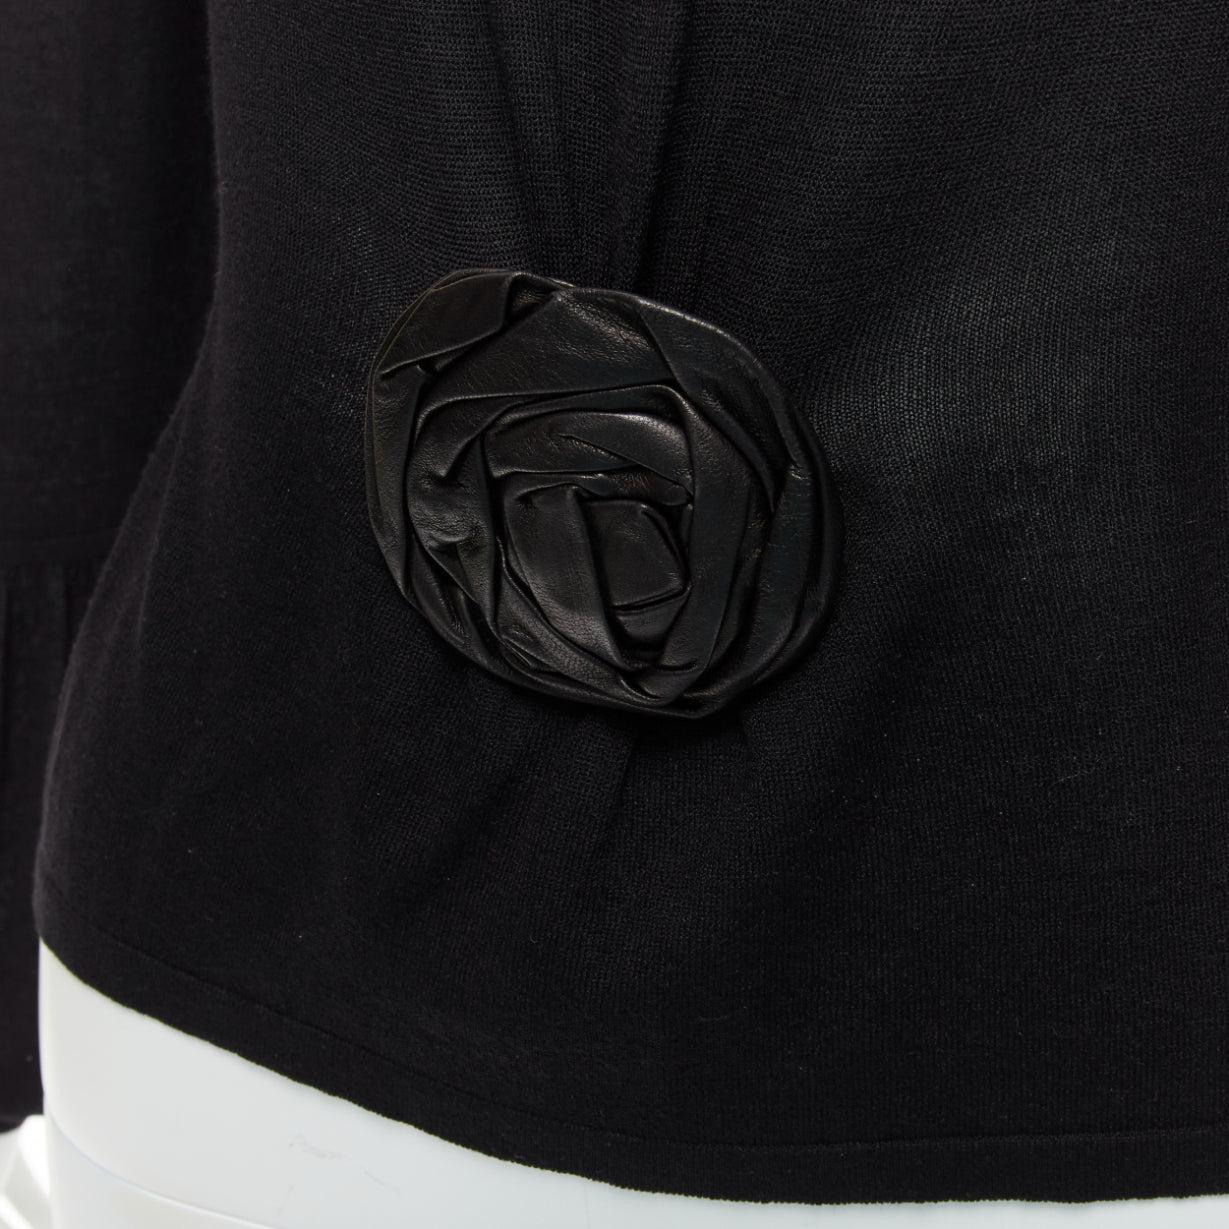 GUCCI Tom ford Vintage Runway black leather rosette puff sleeve sweater
Reference: TGAS/D01007
Brand: Gucci
Designer: Tom Ford
Material: Feels like wool
Color: Black
Pattern: Solid
Closure: Pullover
Extra Details: Black leather